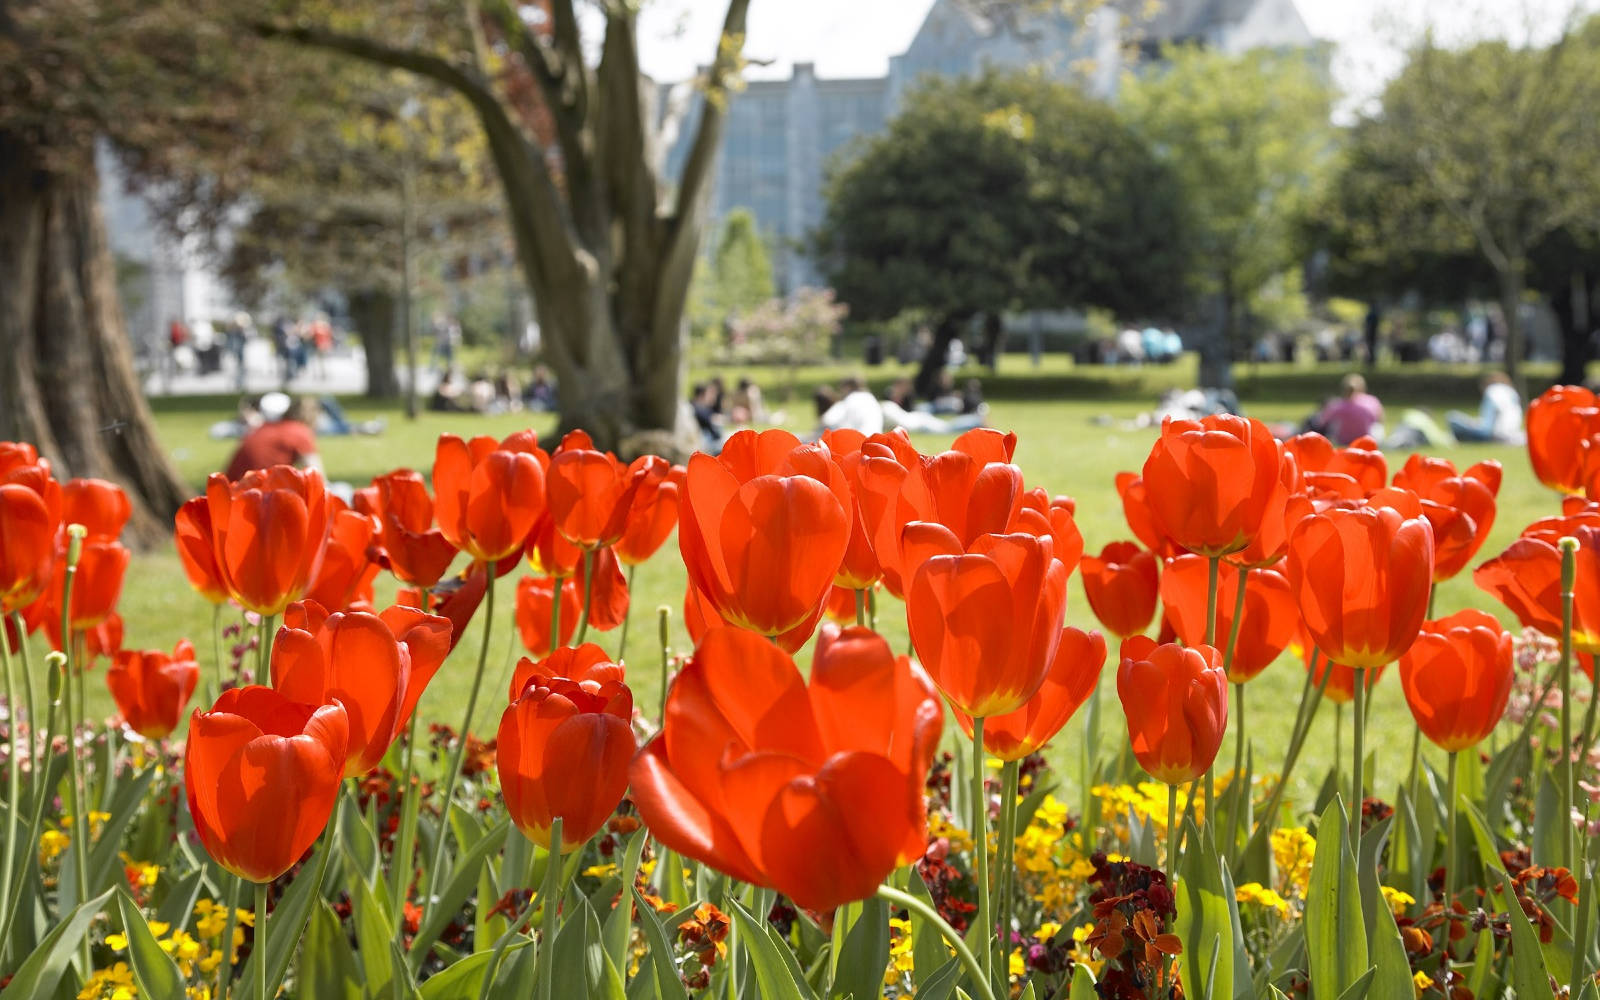 A close up of red tulip flowers with green grass and mature trees in the background